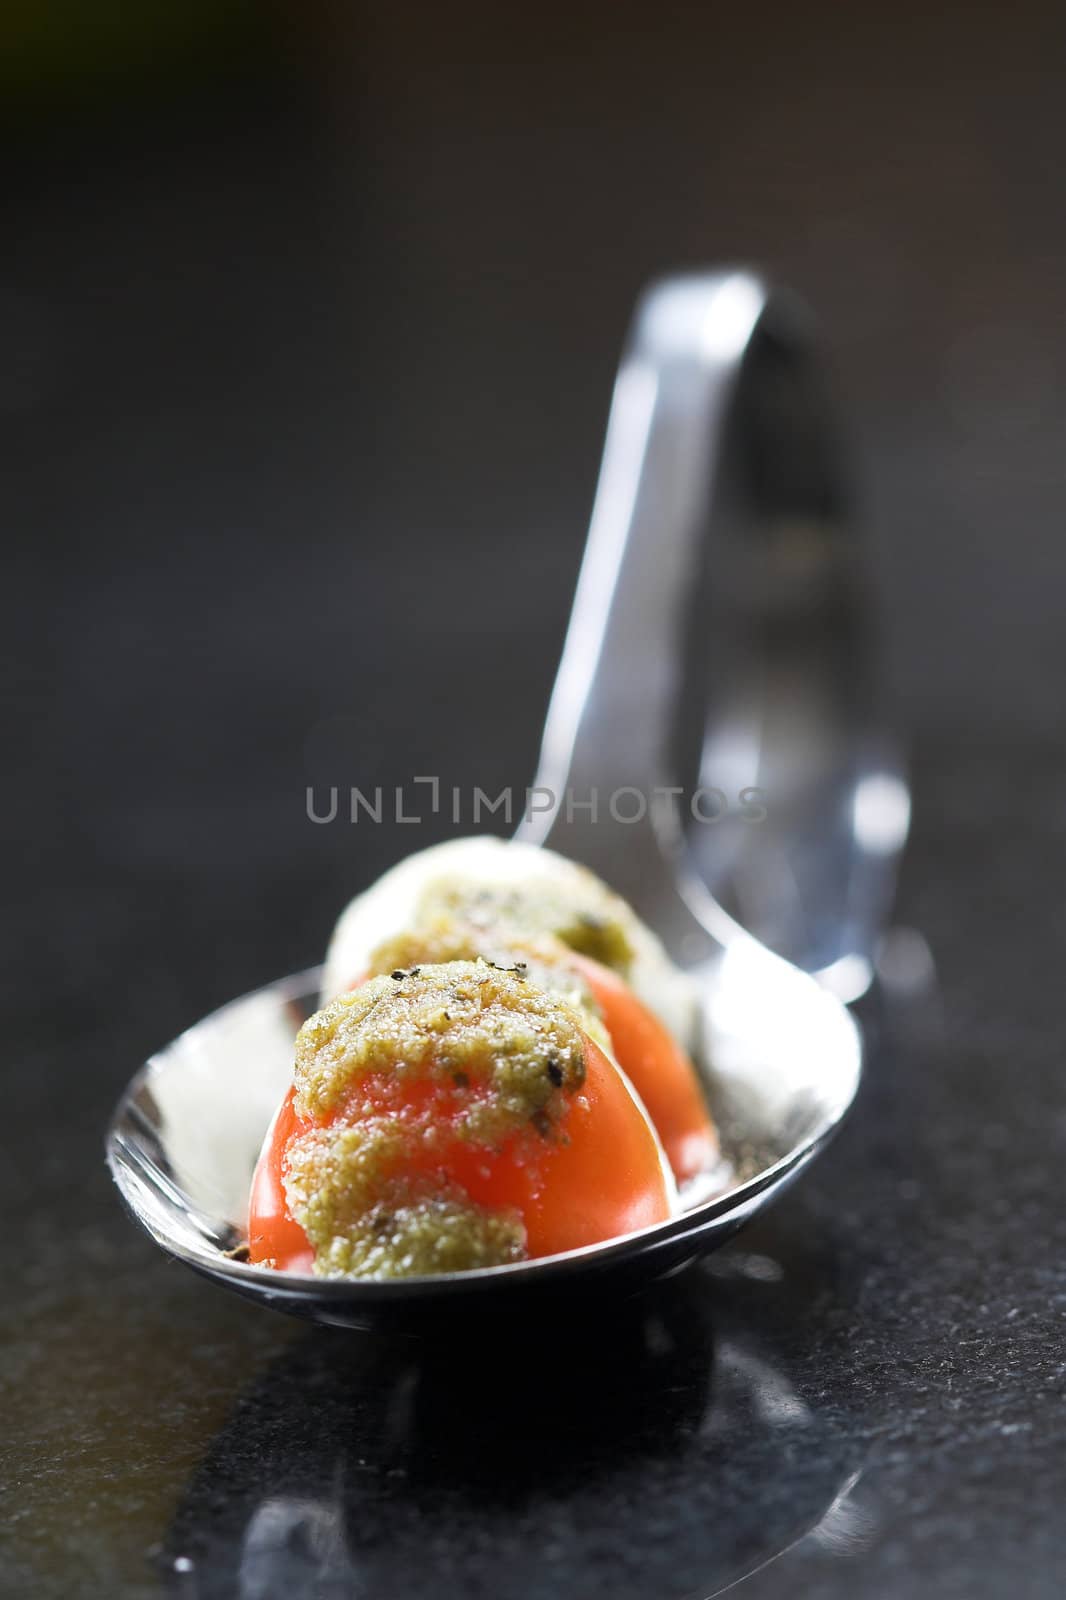 Spoon filled with amuse made of small cherry tomatoes, pesto and mozarella (shallow DOF)